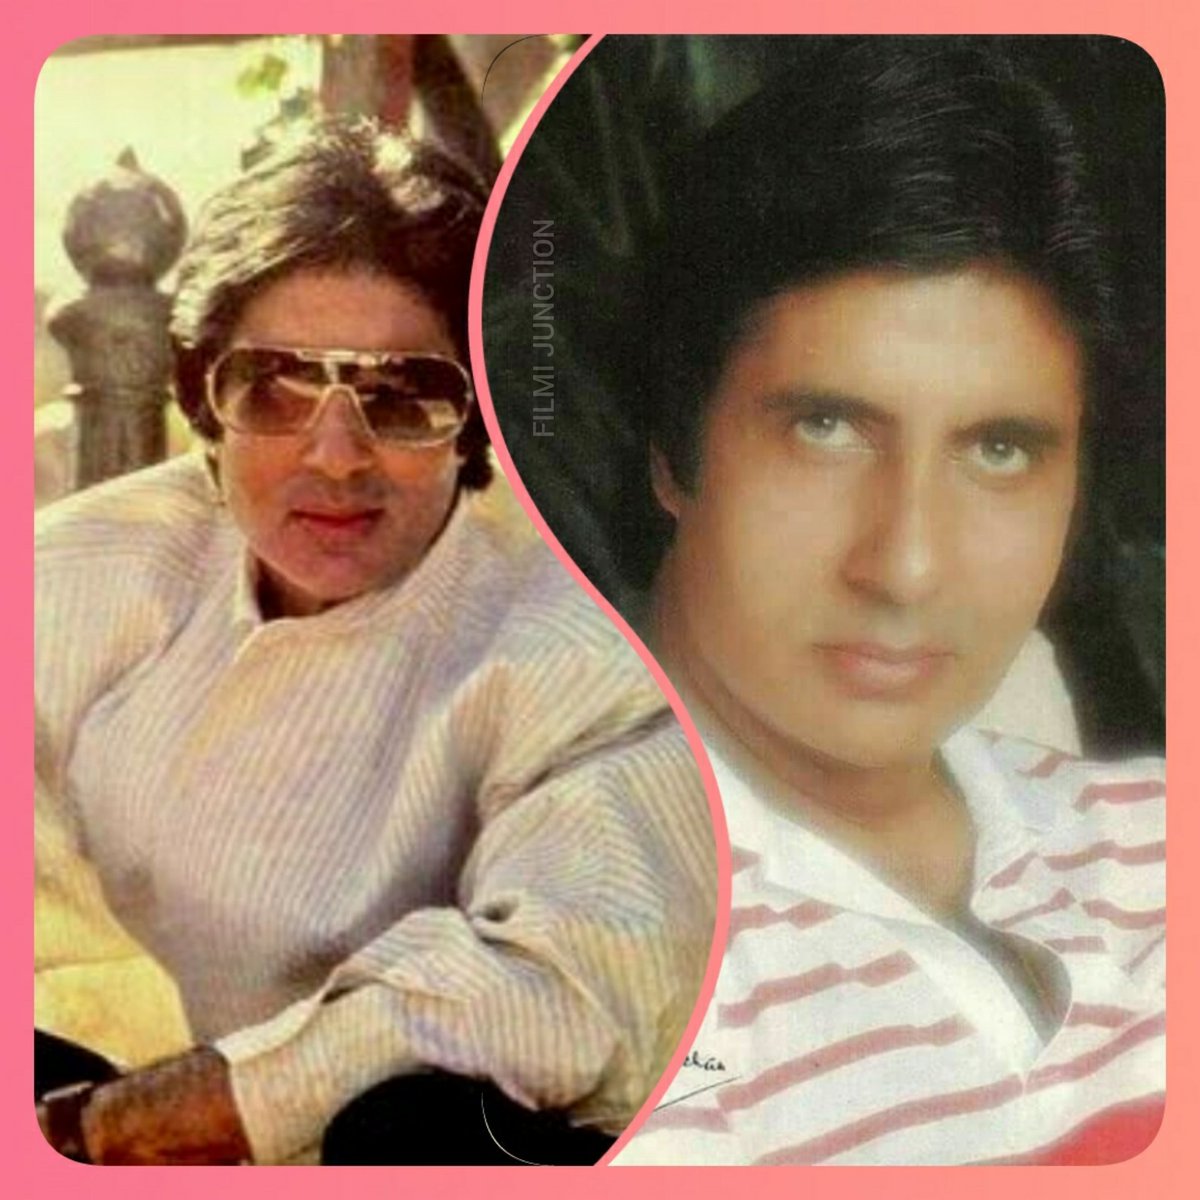 #SundayWithShahenshah: The characters of Bheeshm in #BRChopra's #Mahabharat & a Brahmarishi in #DasariNarayanRao's #Vishwamitra, played by #MukeshKhanna, were originally written for #SrBachchan, but at that time, it was impossible to sign the #HighestPaid #MegaStar for a TVseries